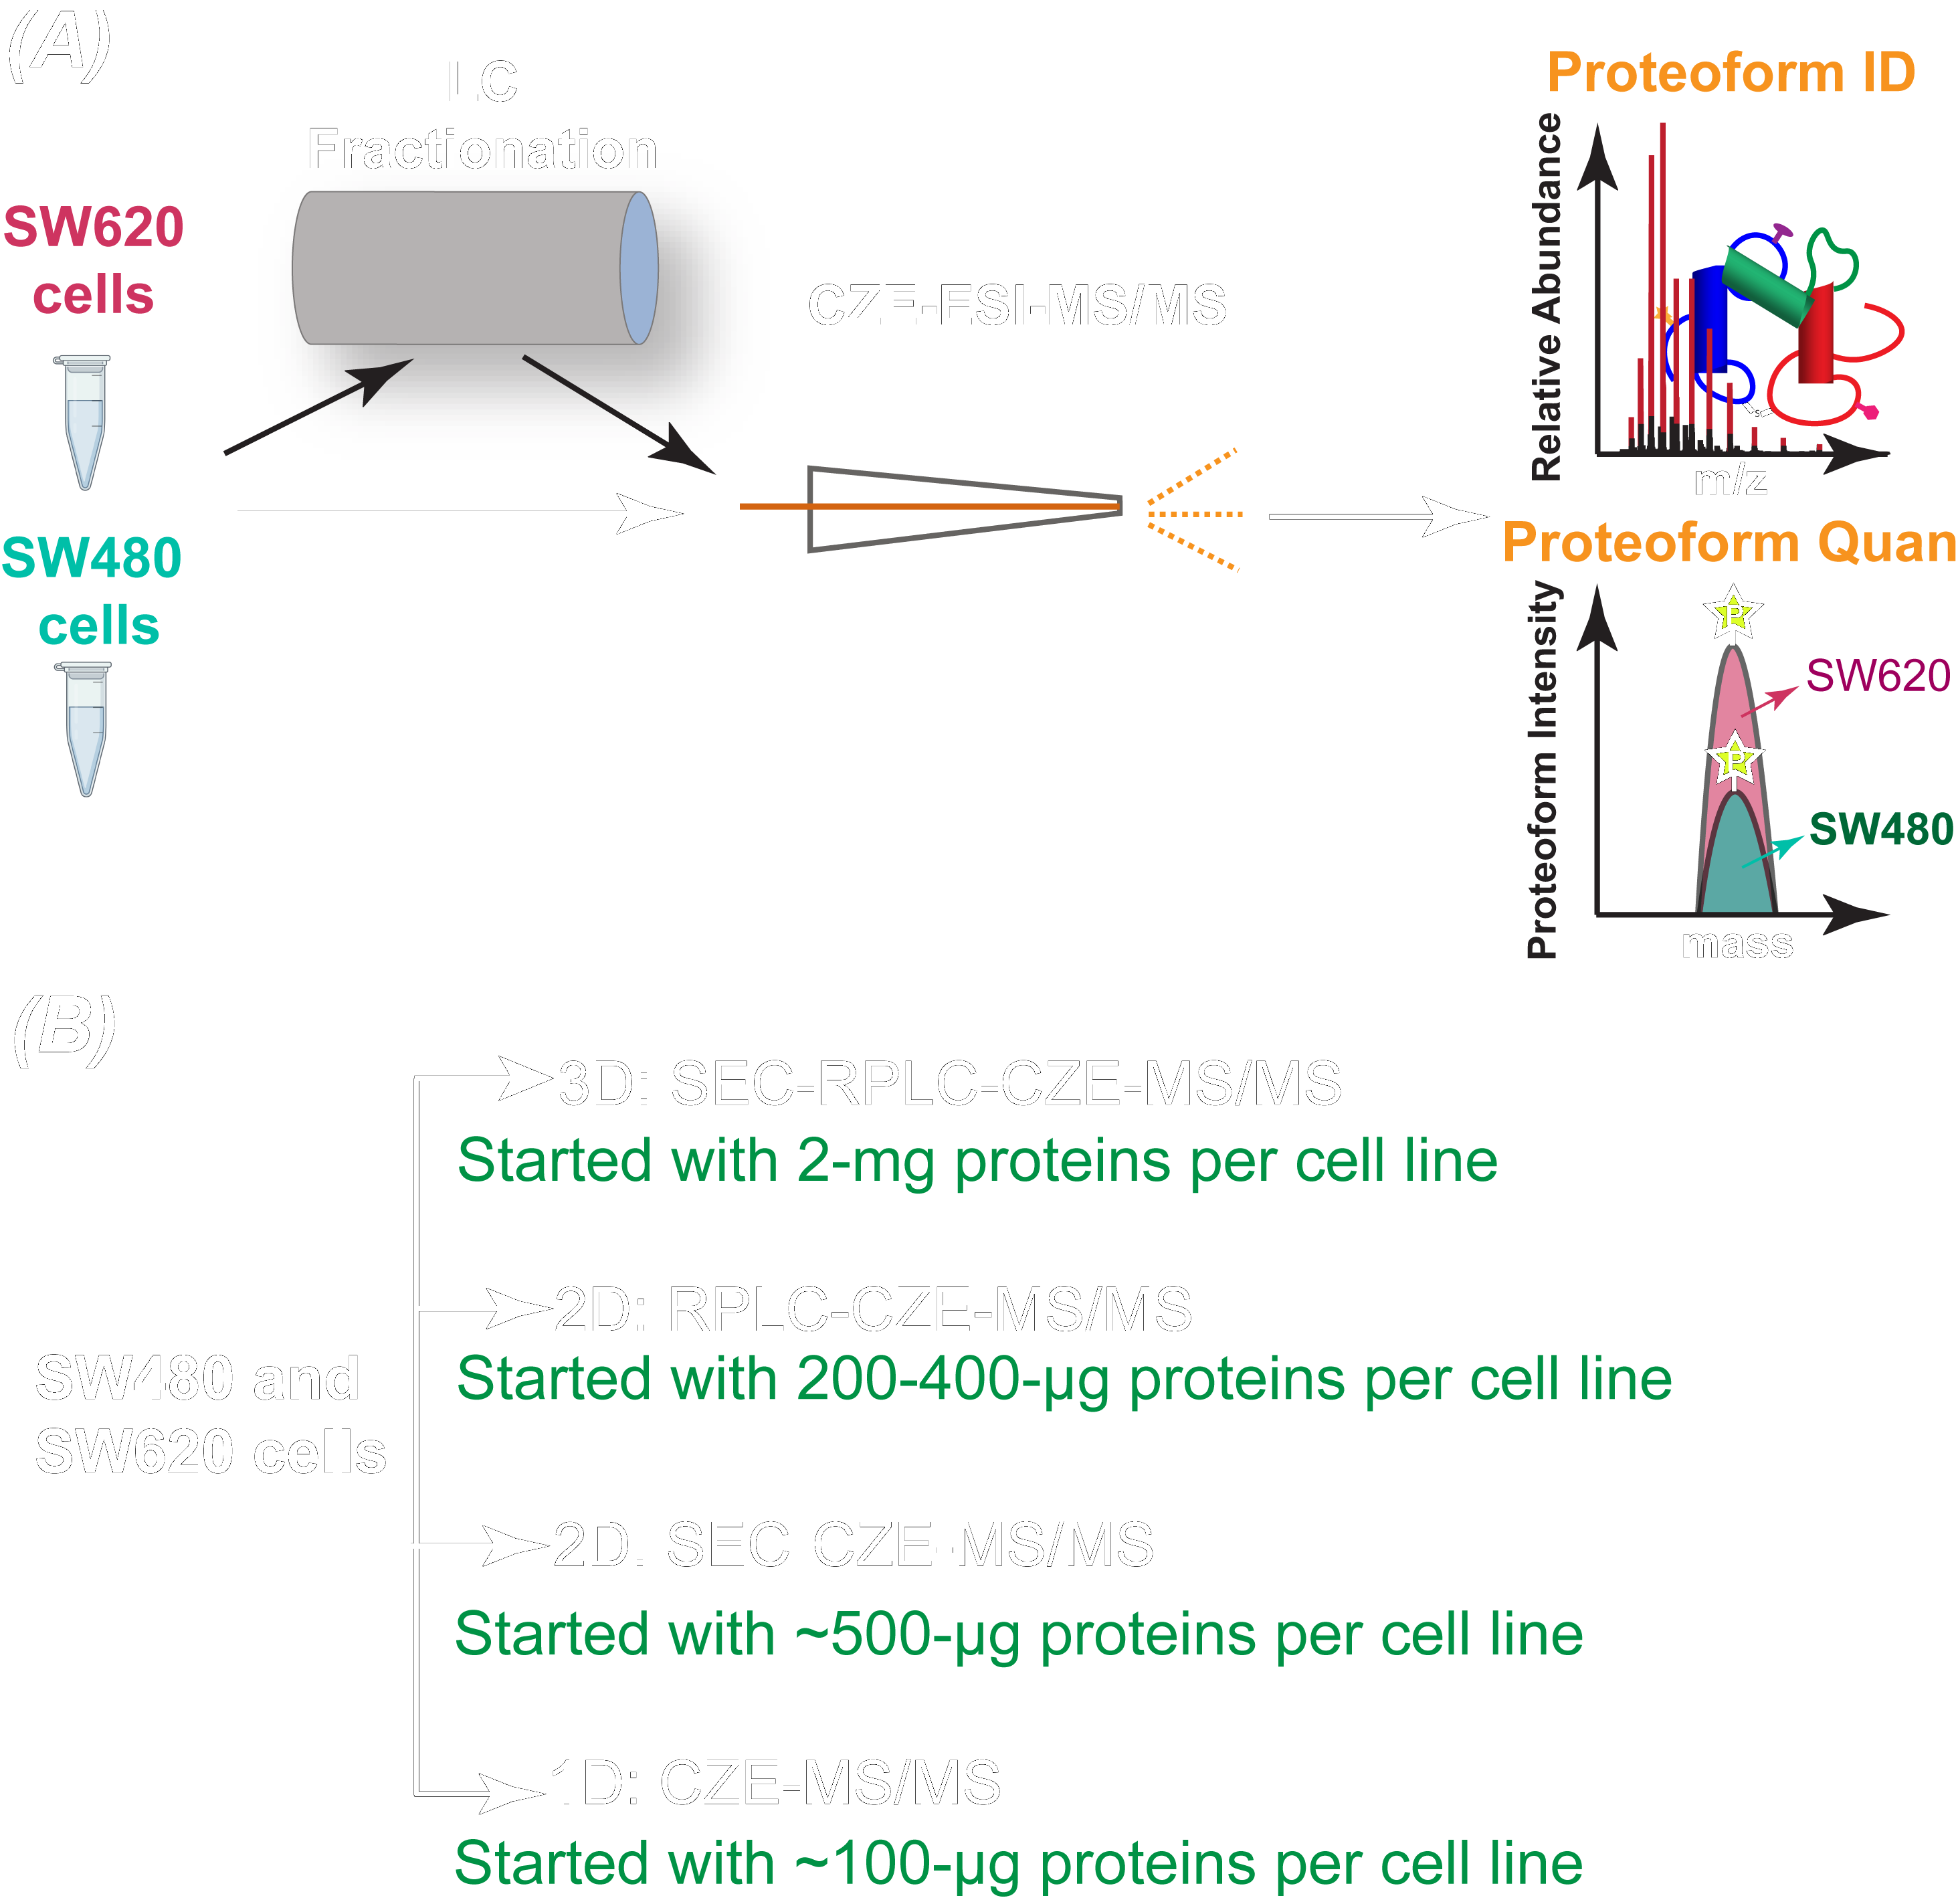 Multi-dimensional liquid chromatography-capillary electrophoresis-tandem mass spectrometry to study proteoforms in nonmetastatic and metastatic colorectal cancer cell lines (SW480 and SW620 cells) for proteoform identification and quantification. 